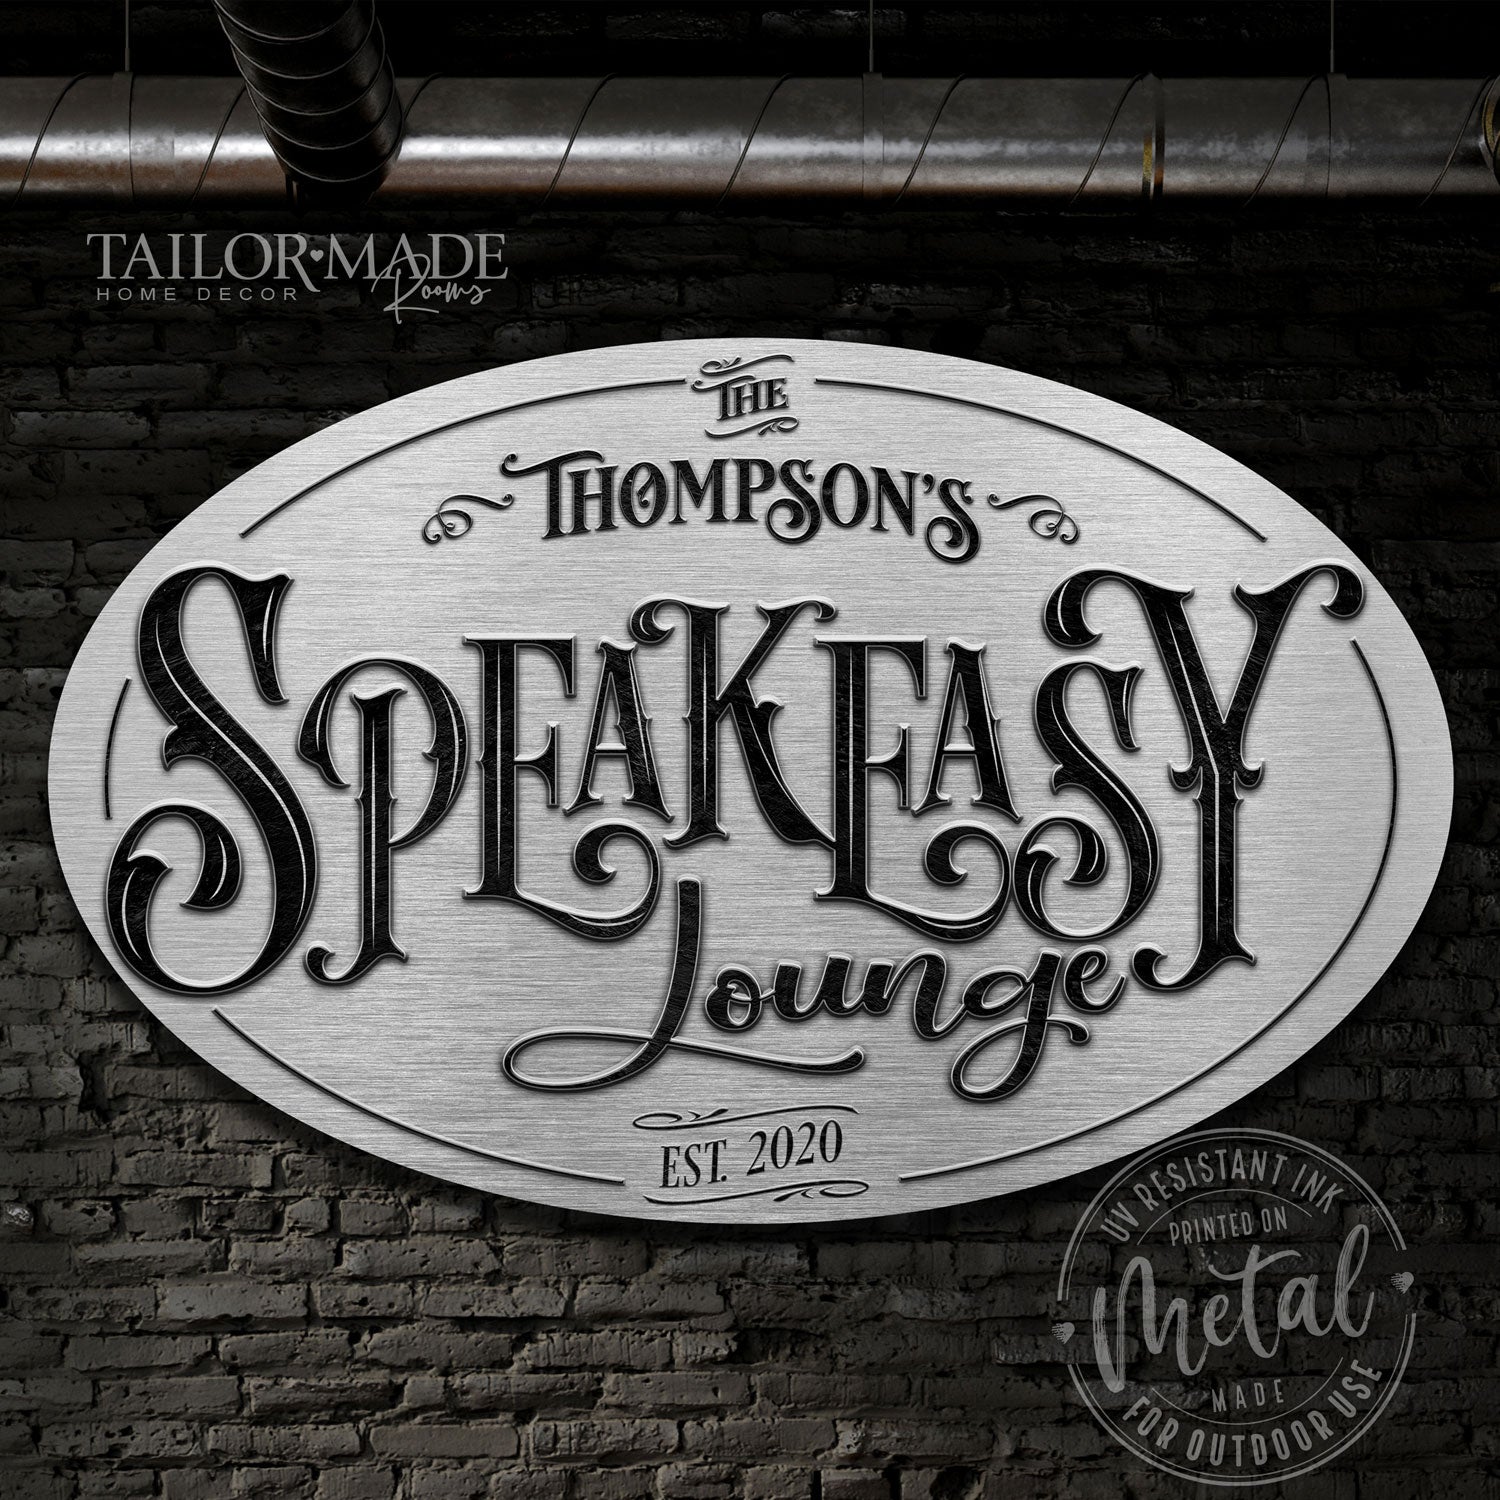 speakeasy sign in on silver background with black letters that say (name) speakeasy Lounge